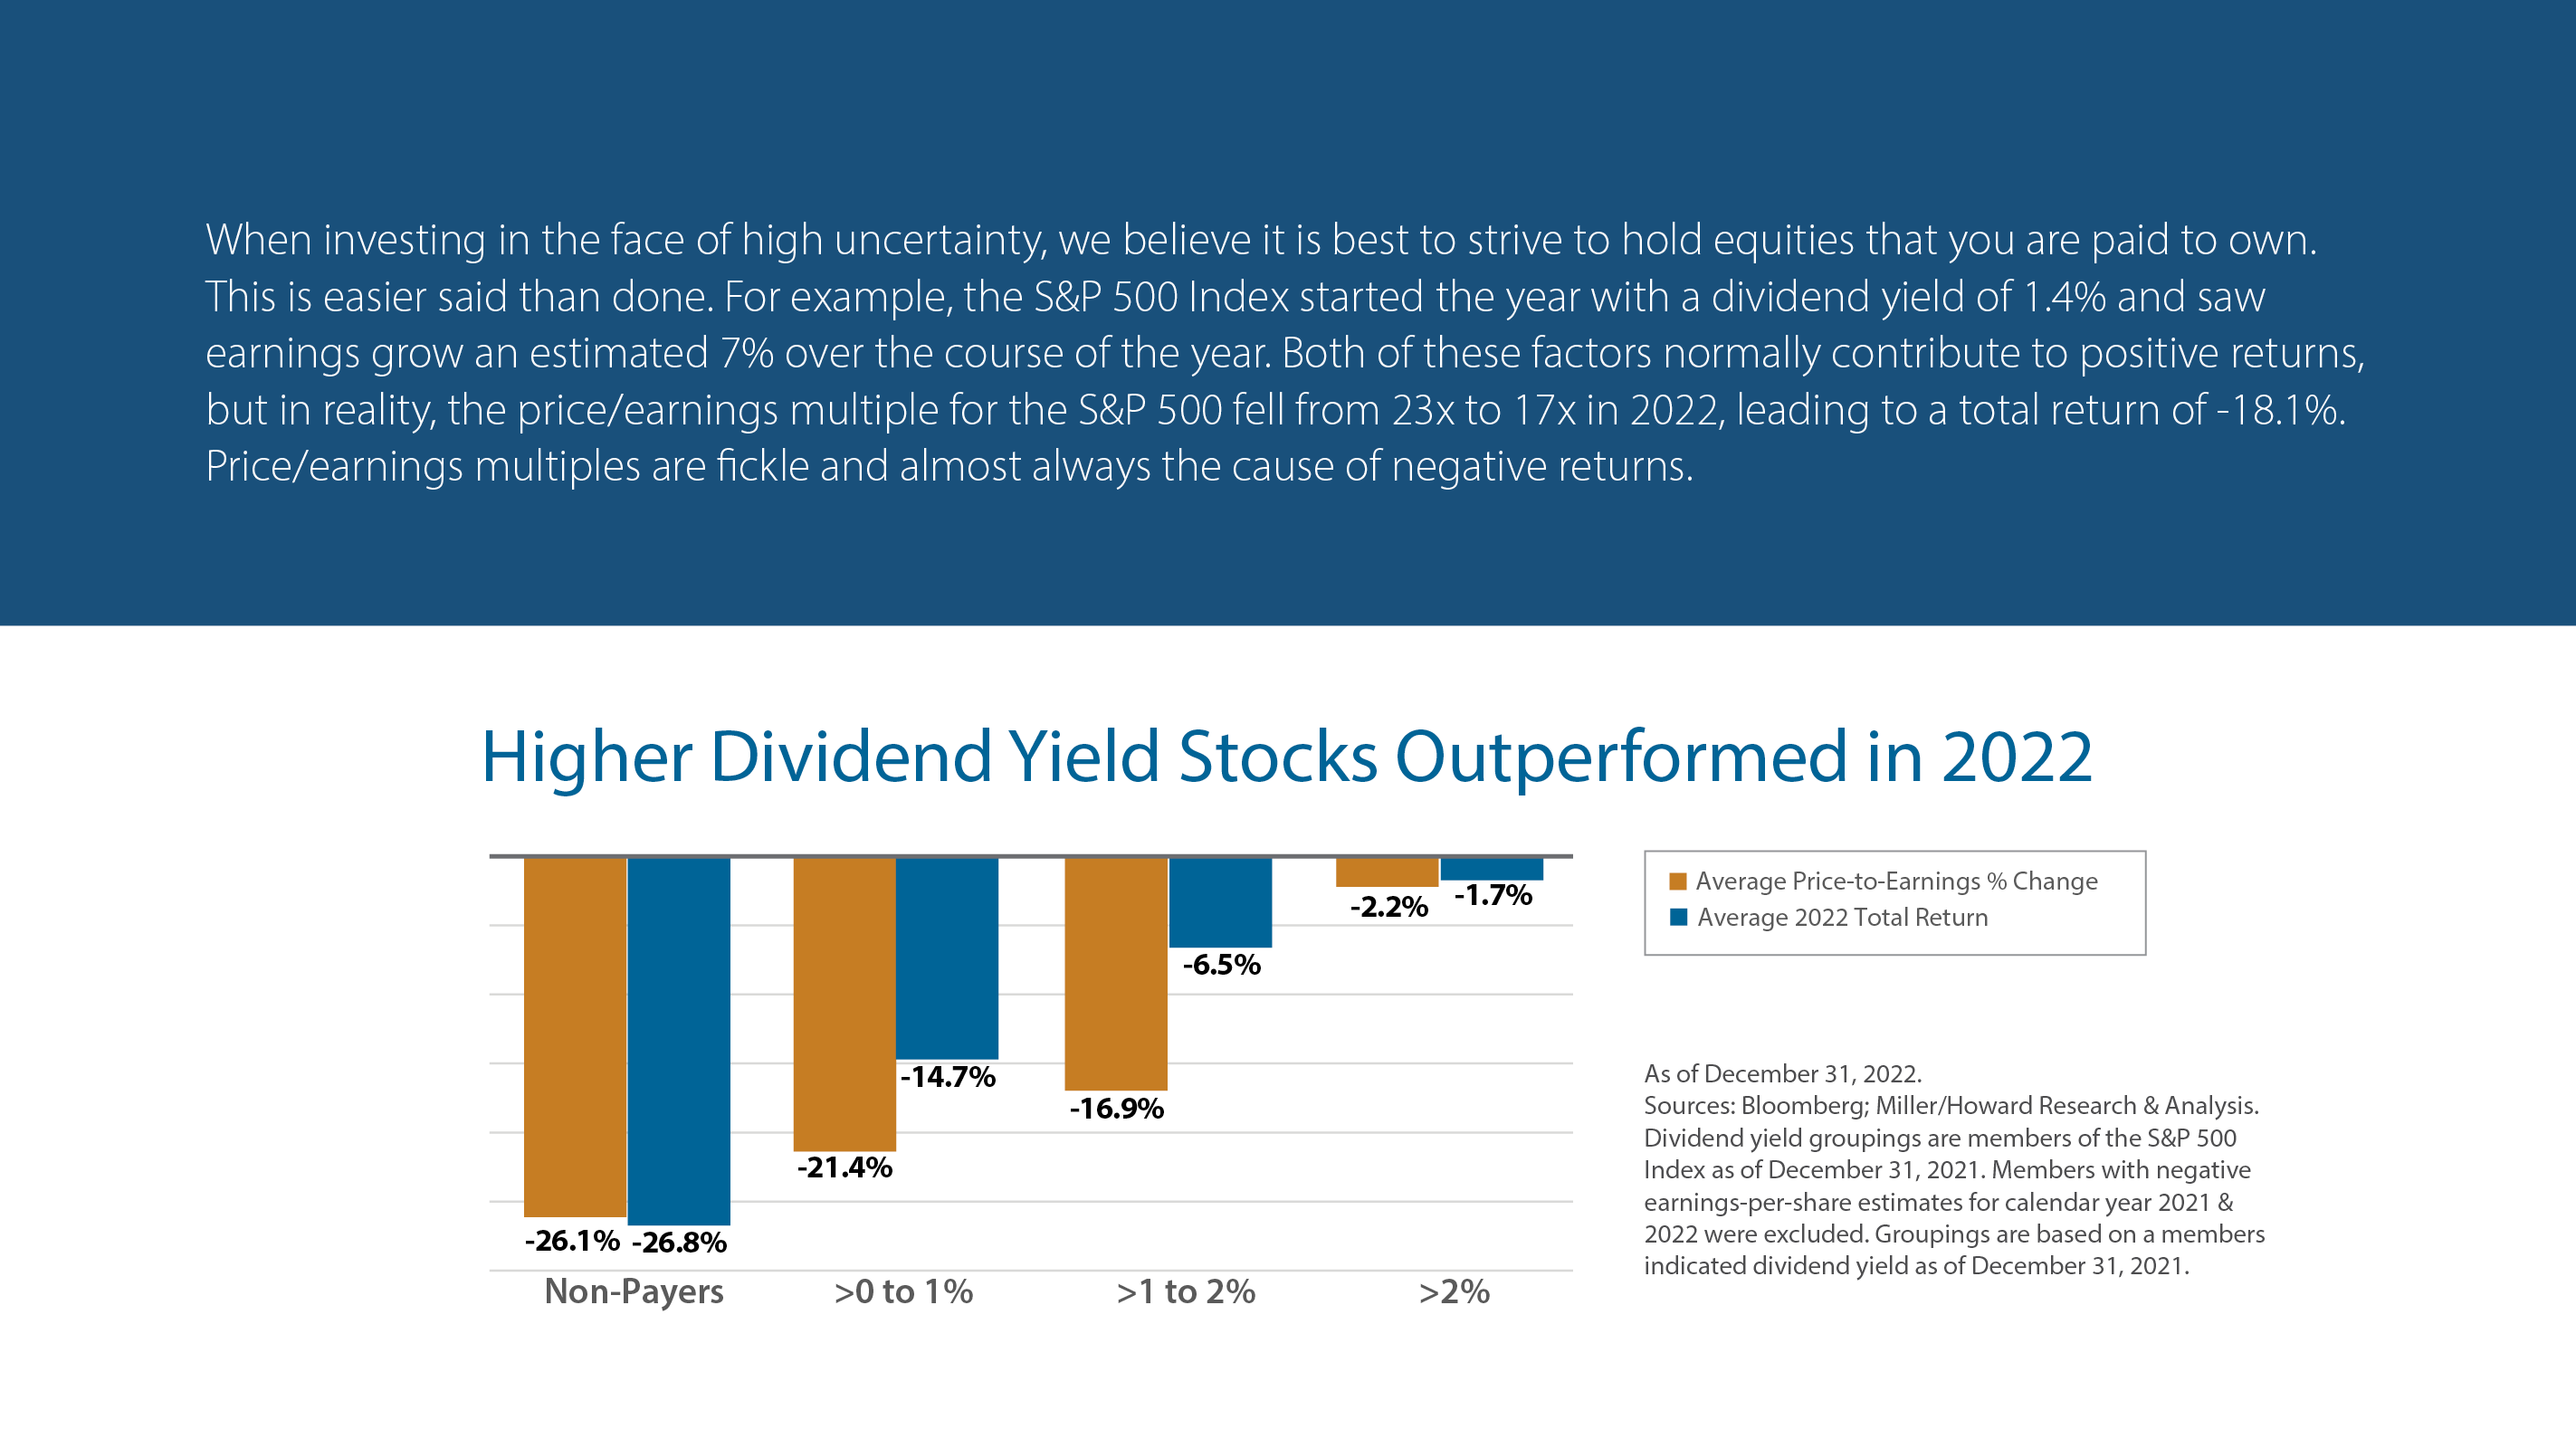 Higher Dividend Yield Stocks Outperformed in 2022